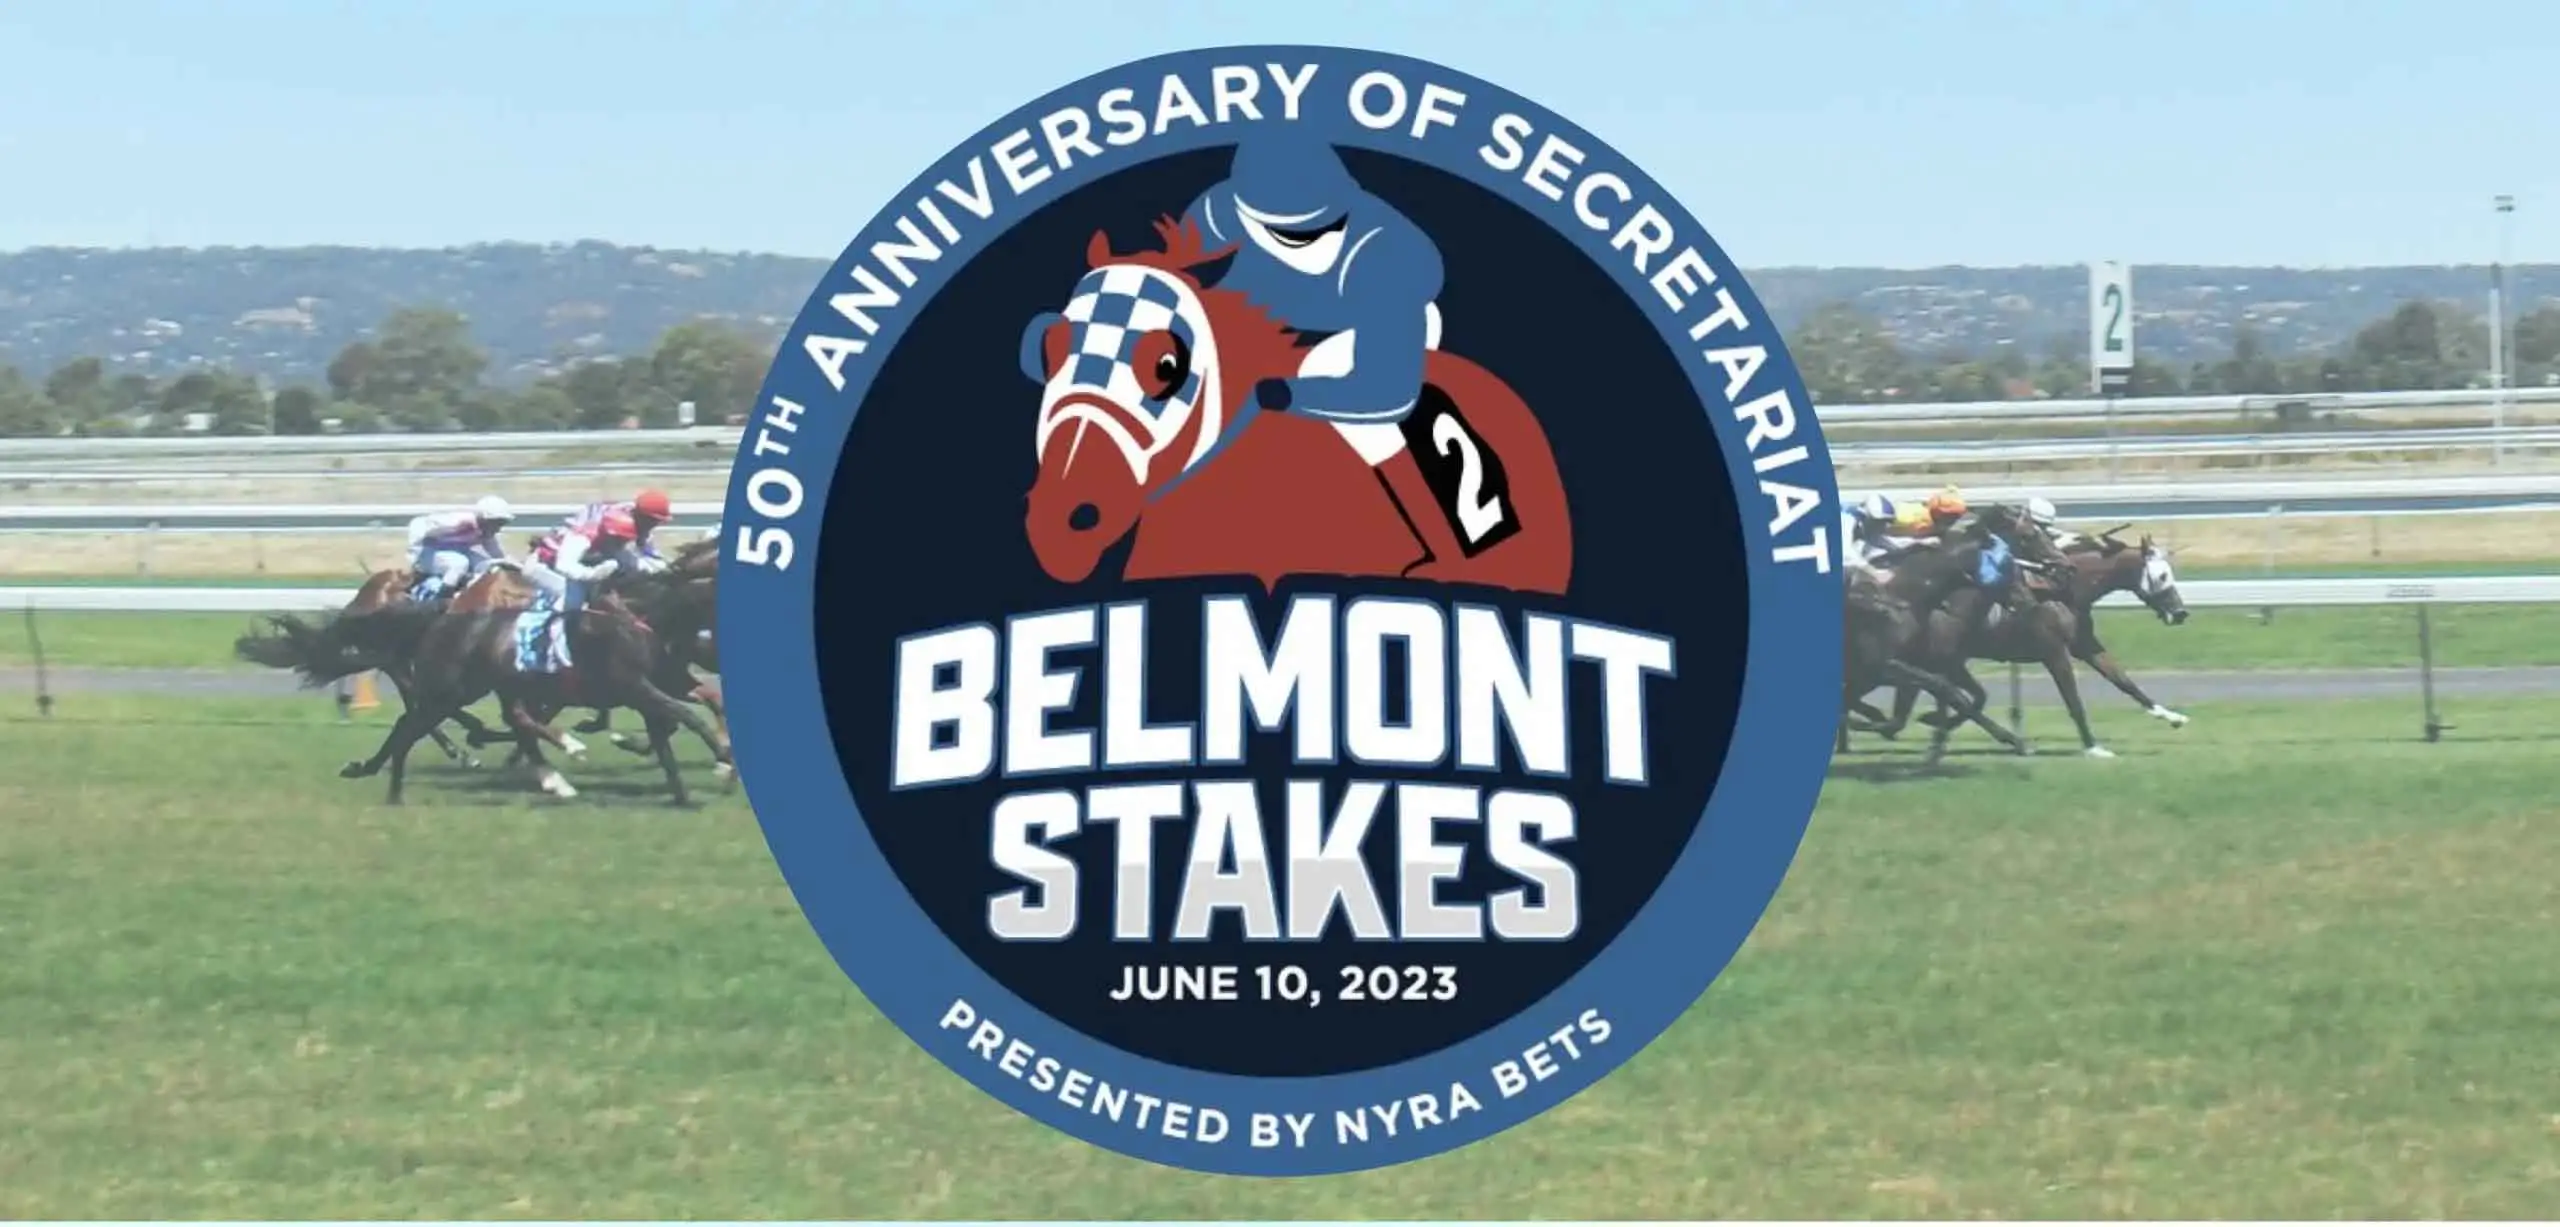 Belmont Stakes horse racing 2023